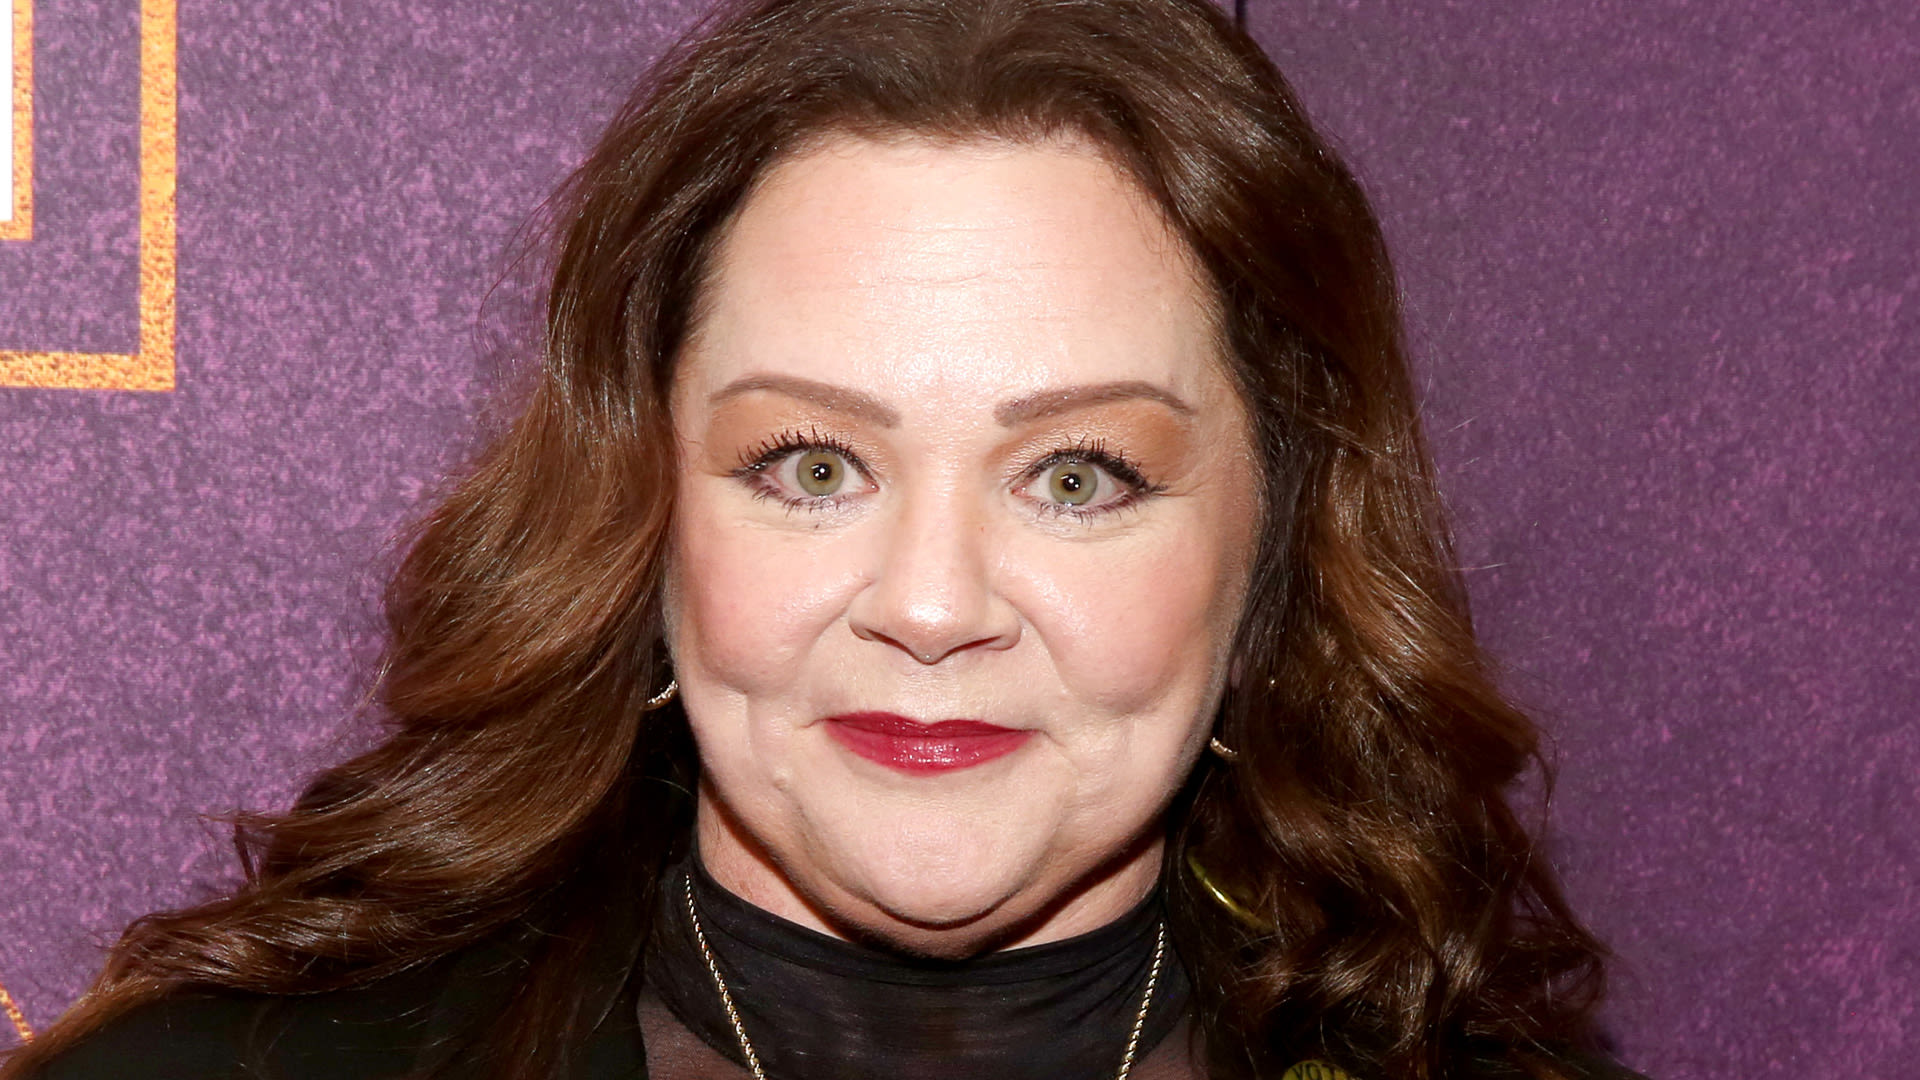 Melissa McCarthy poses in sheer black top and pants in NYC after weight-loss